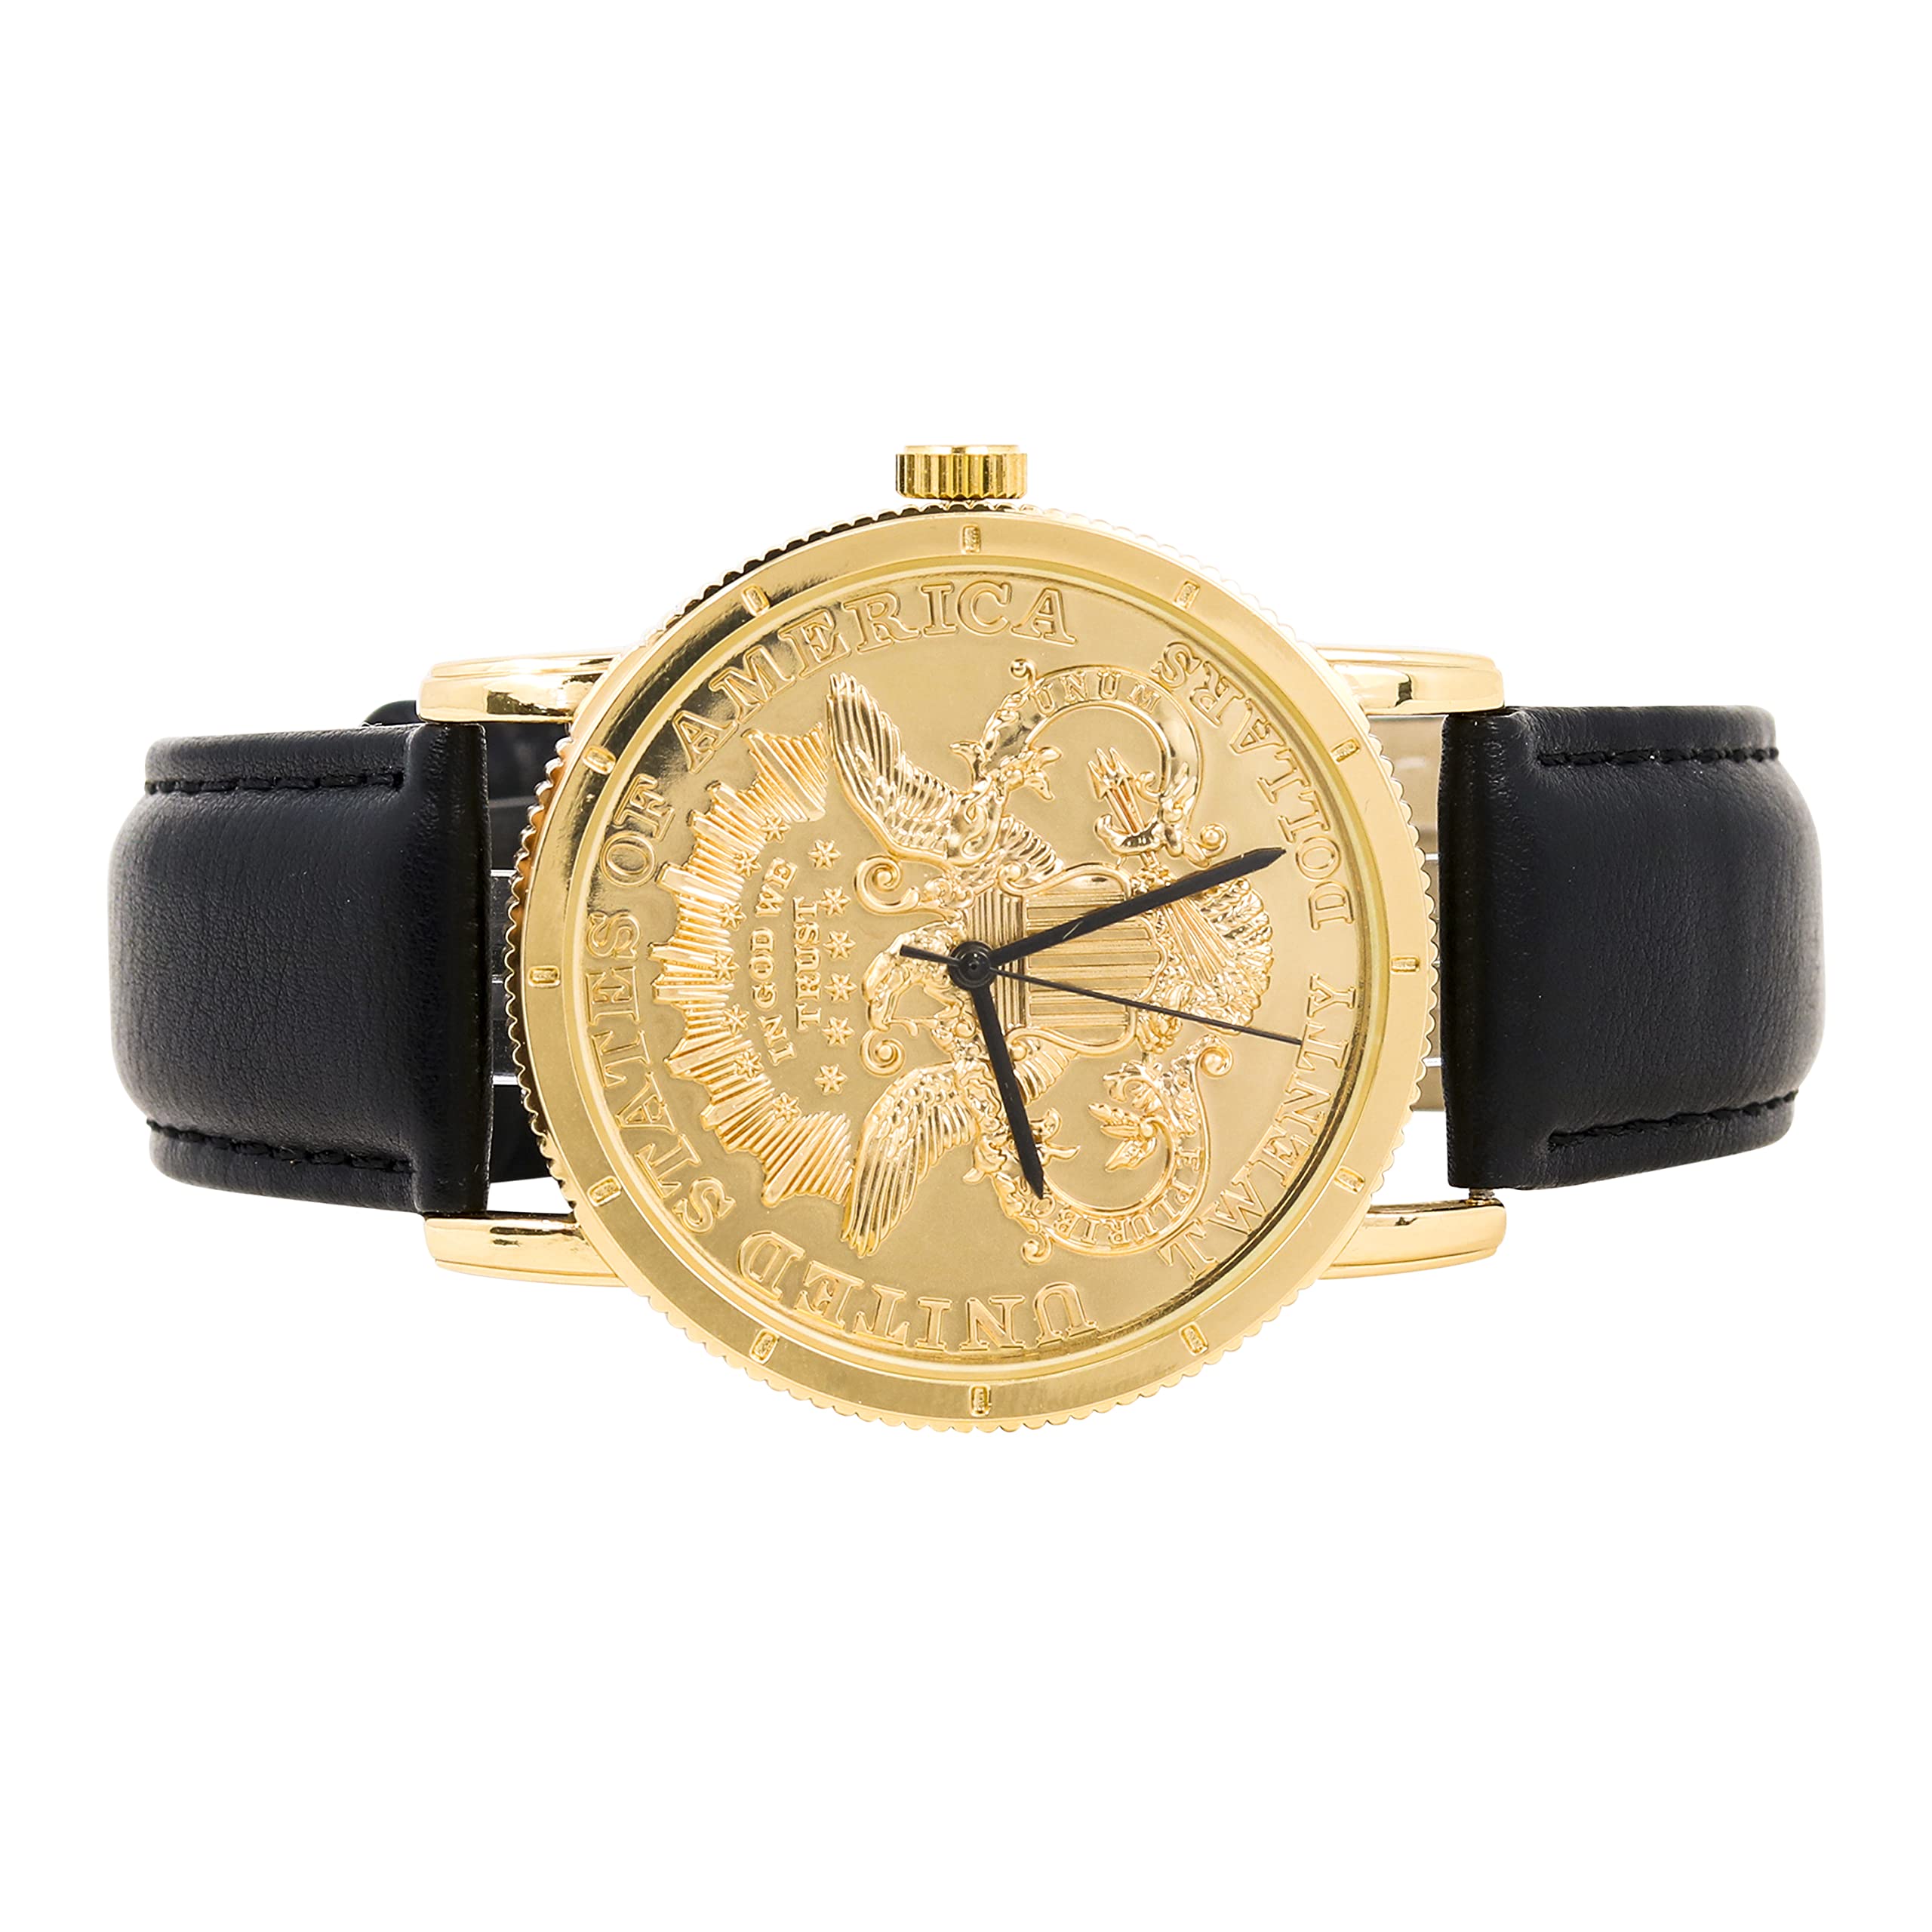 Men's Round Leather Band Watch 40mm Gold